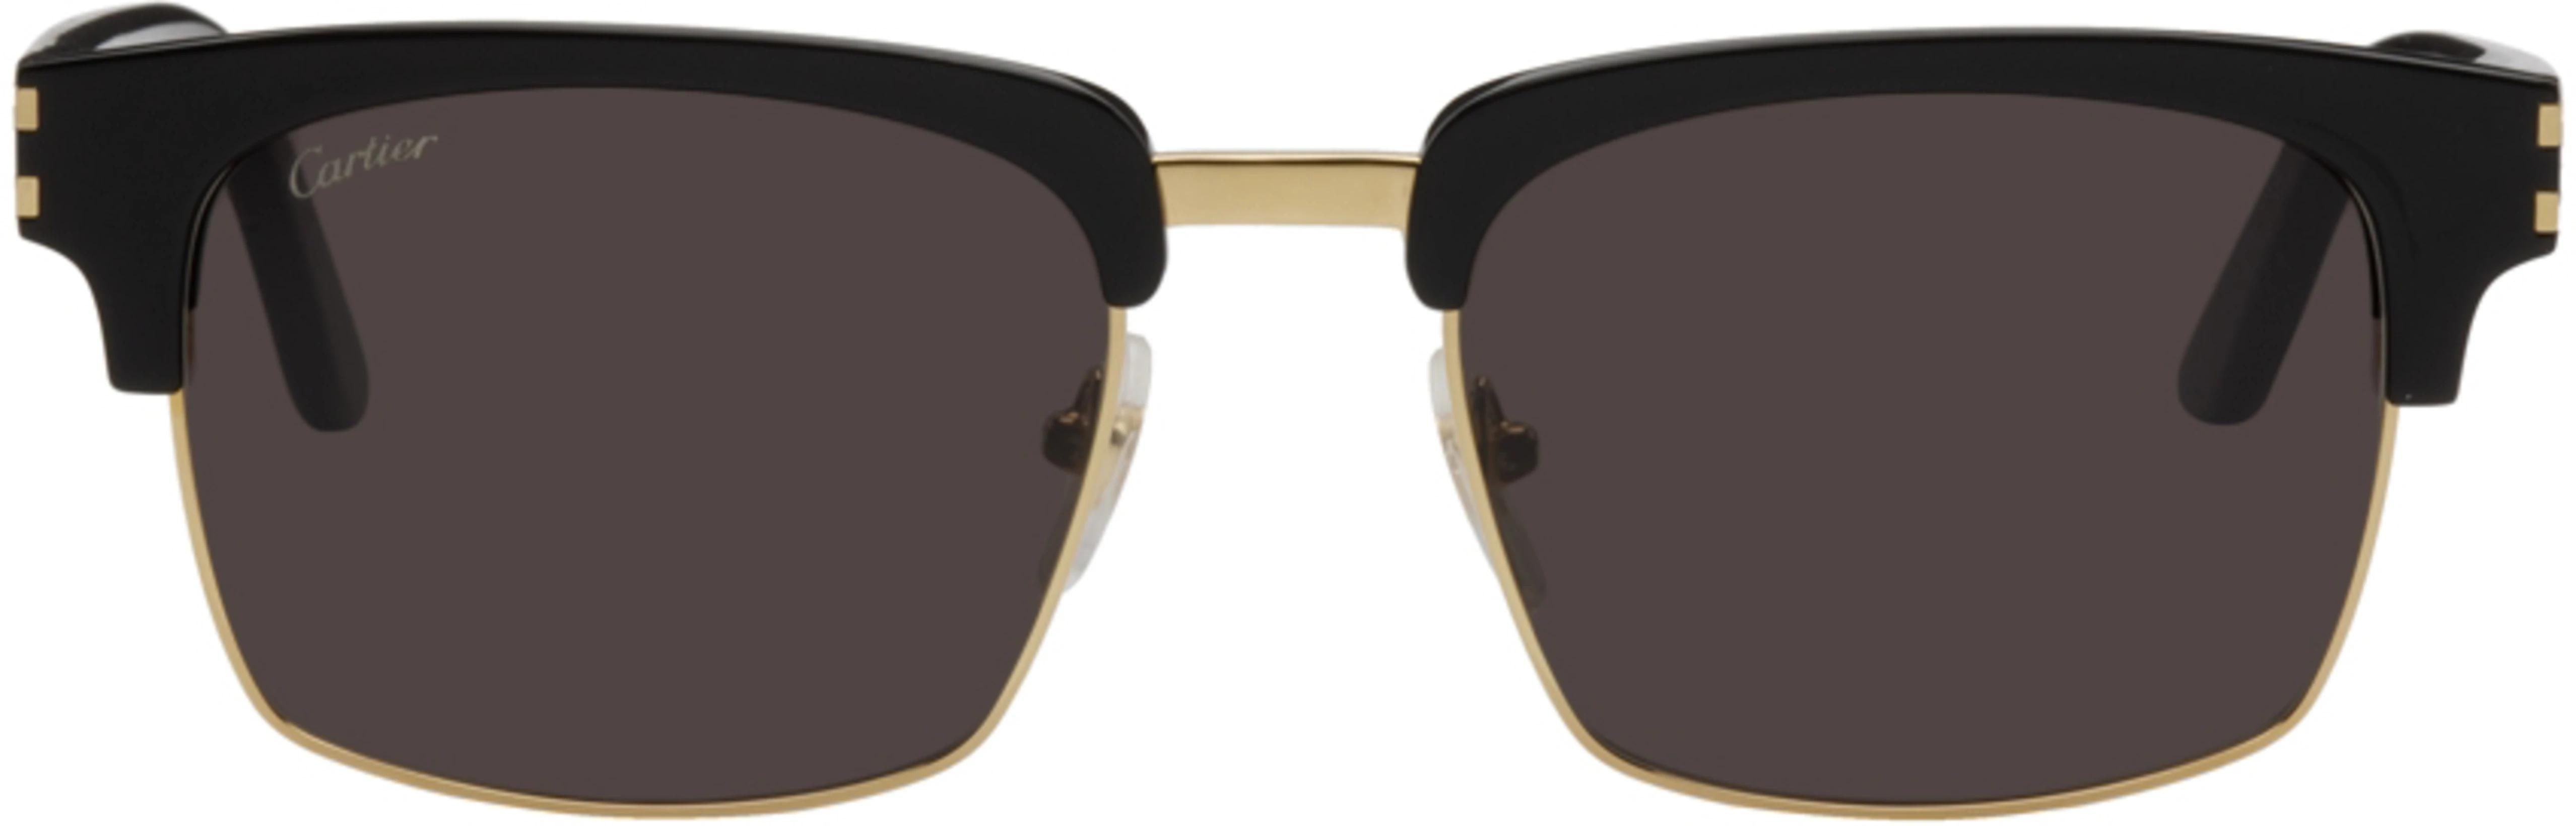 Black & Gold Square Sunglasses by CARTIER